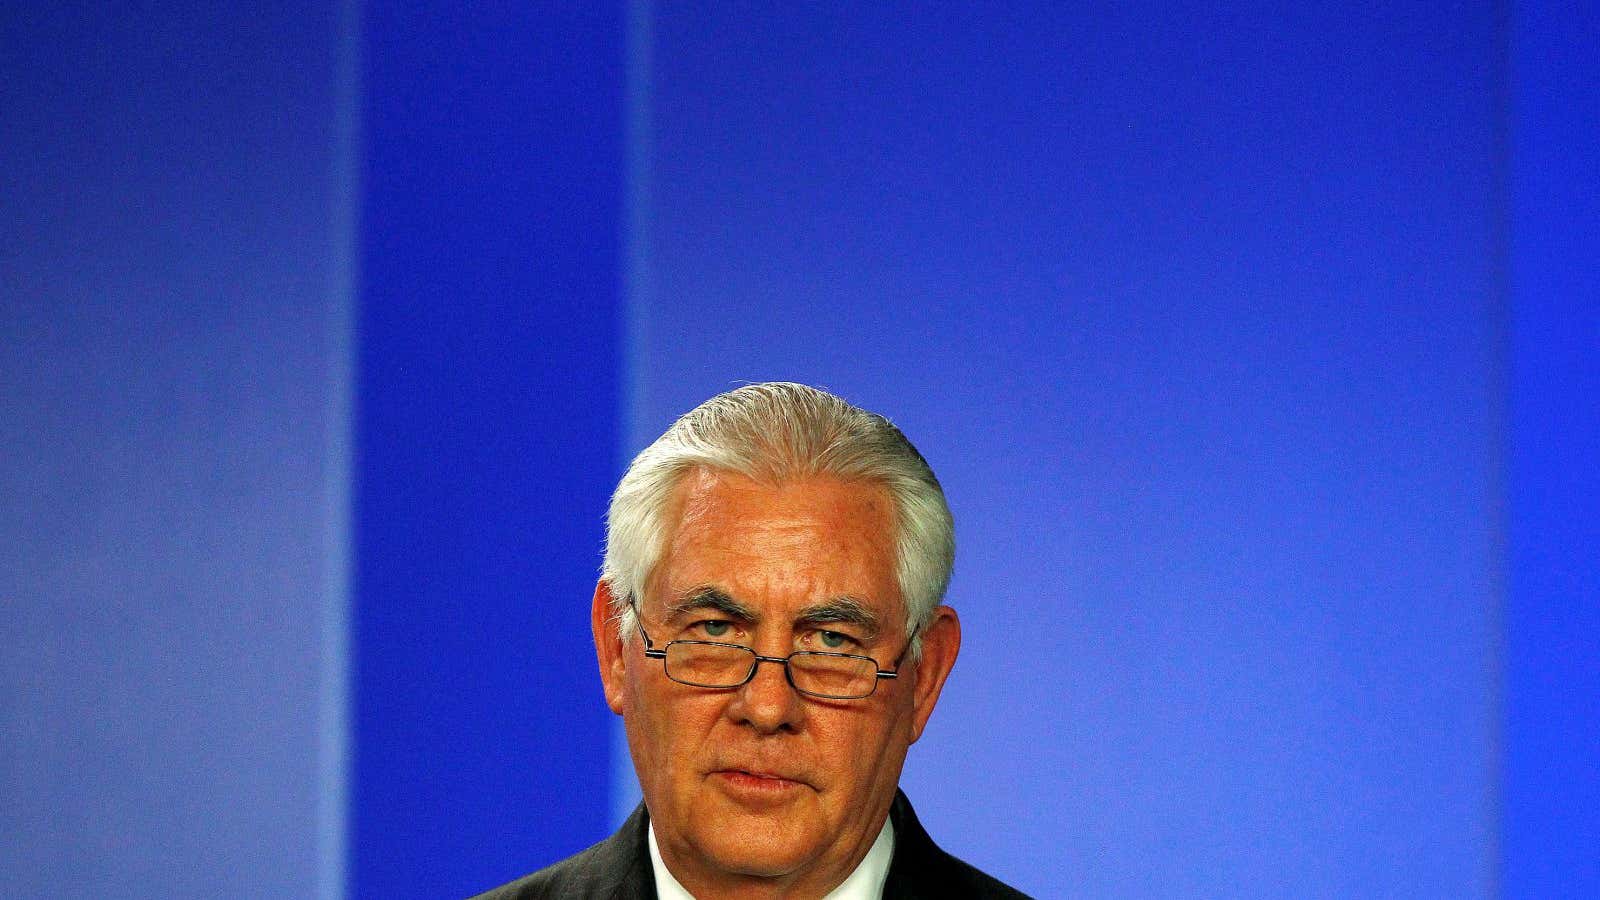 Rex Tillerson’s departure had been rumored for months.